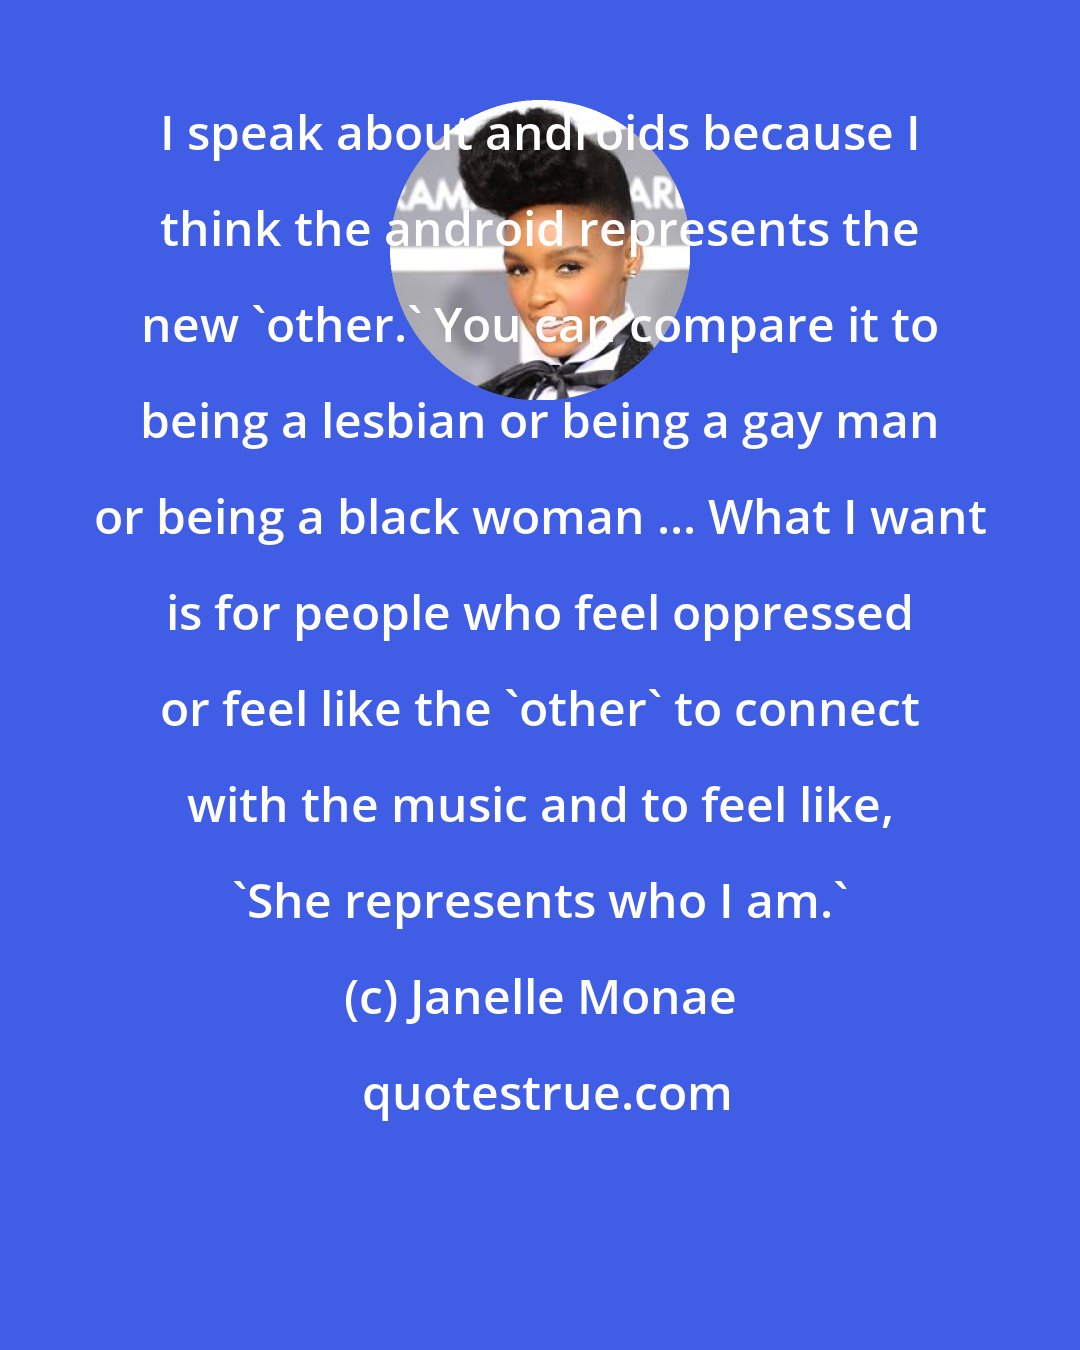 Janelle Monae: I speak about androids because I think the android represents the new 'other.' You can compare it to being a lesbian or being a gay man or being a black woman ... What I want is for people who feel oppressed or feel like the 'other' to connect with the music and to feel like, 'She represents who I am.'